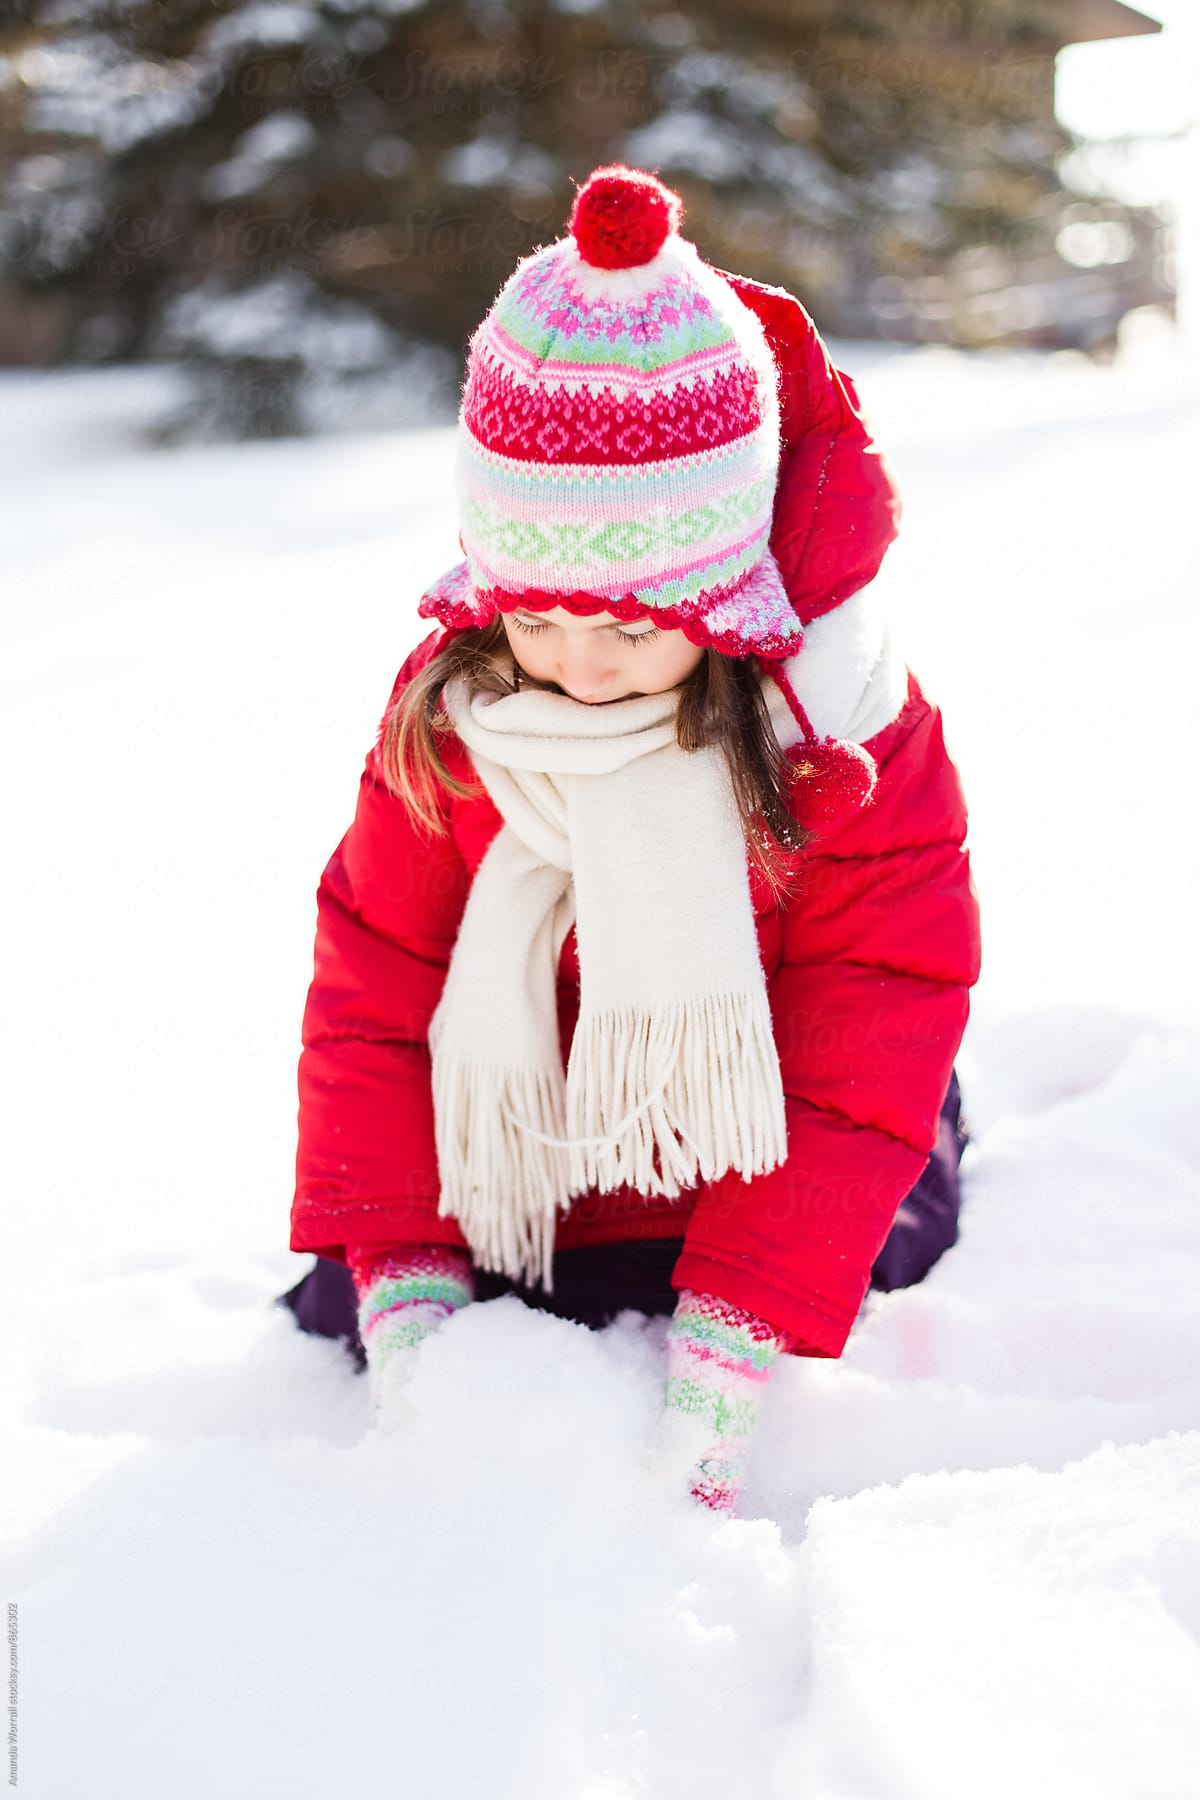 Young girl wearing colorful snow gear scoops up snow in her mittens